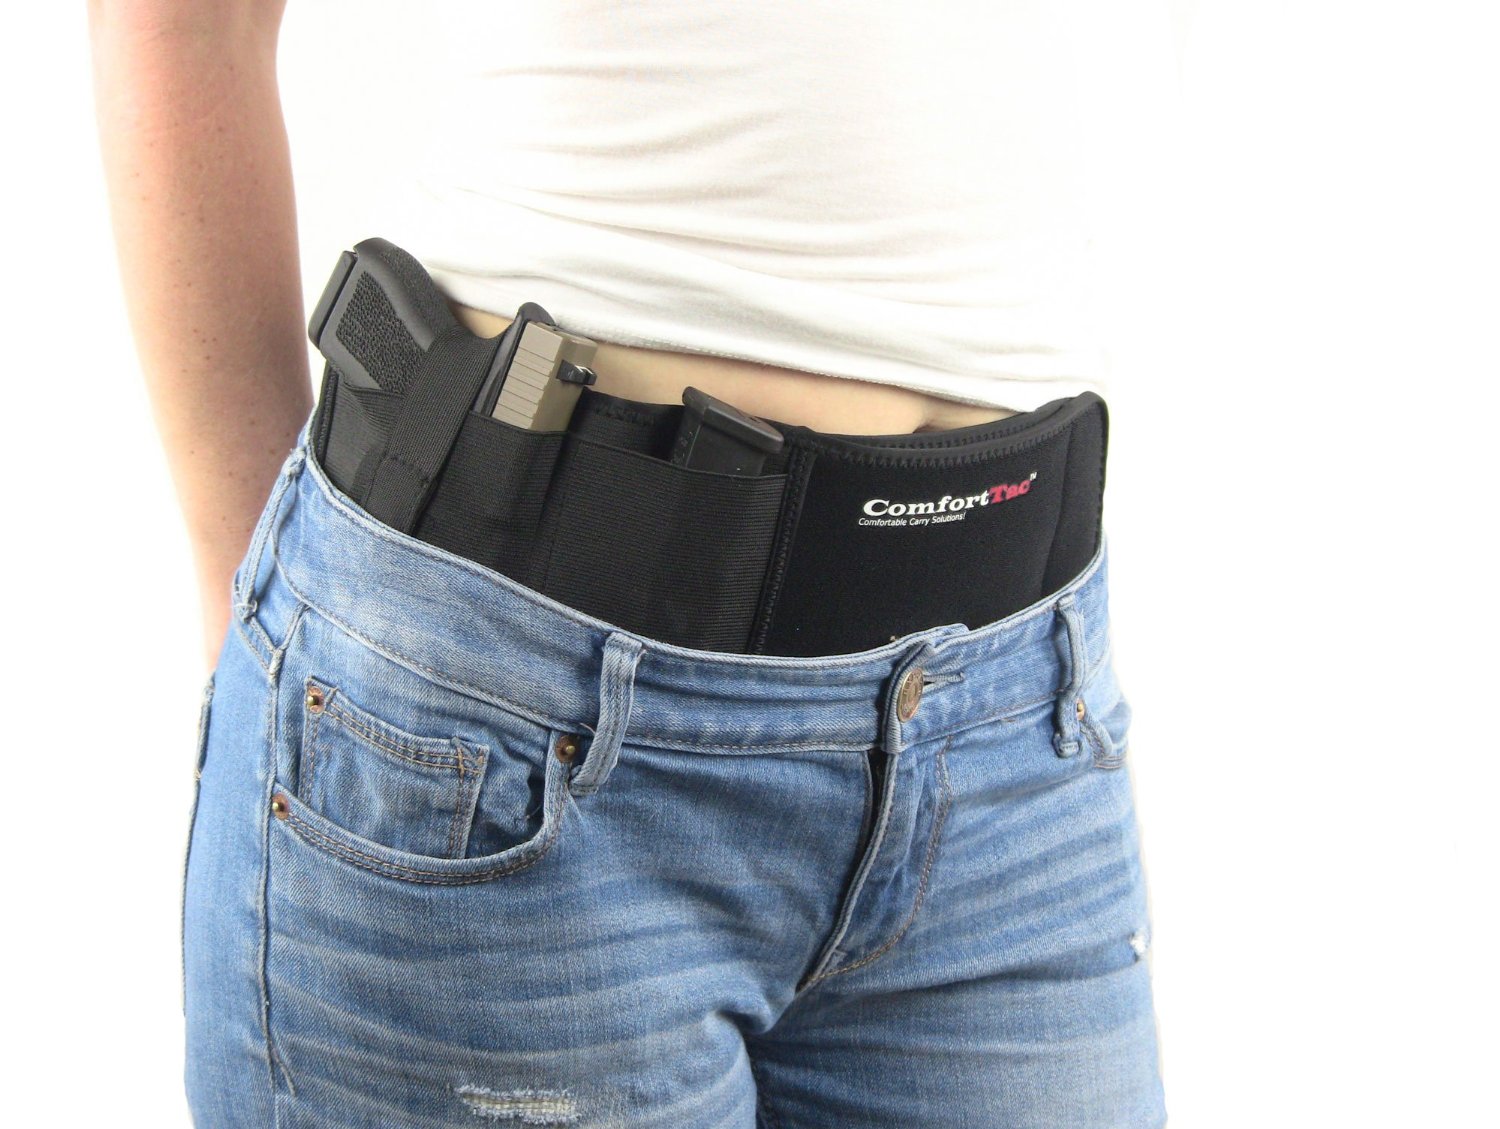 Top 5 Best Concealed Carry Holsters Ccw Holster Reviews 2019 Handgun Podcast 